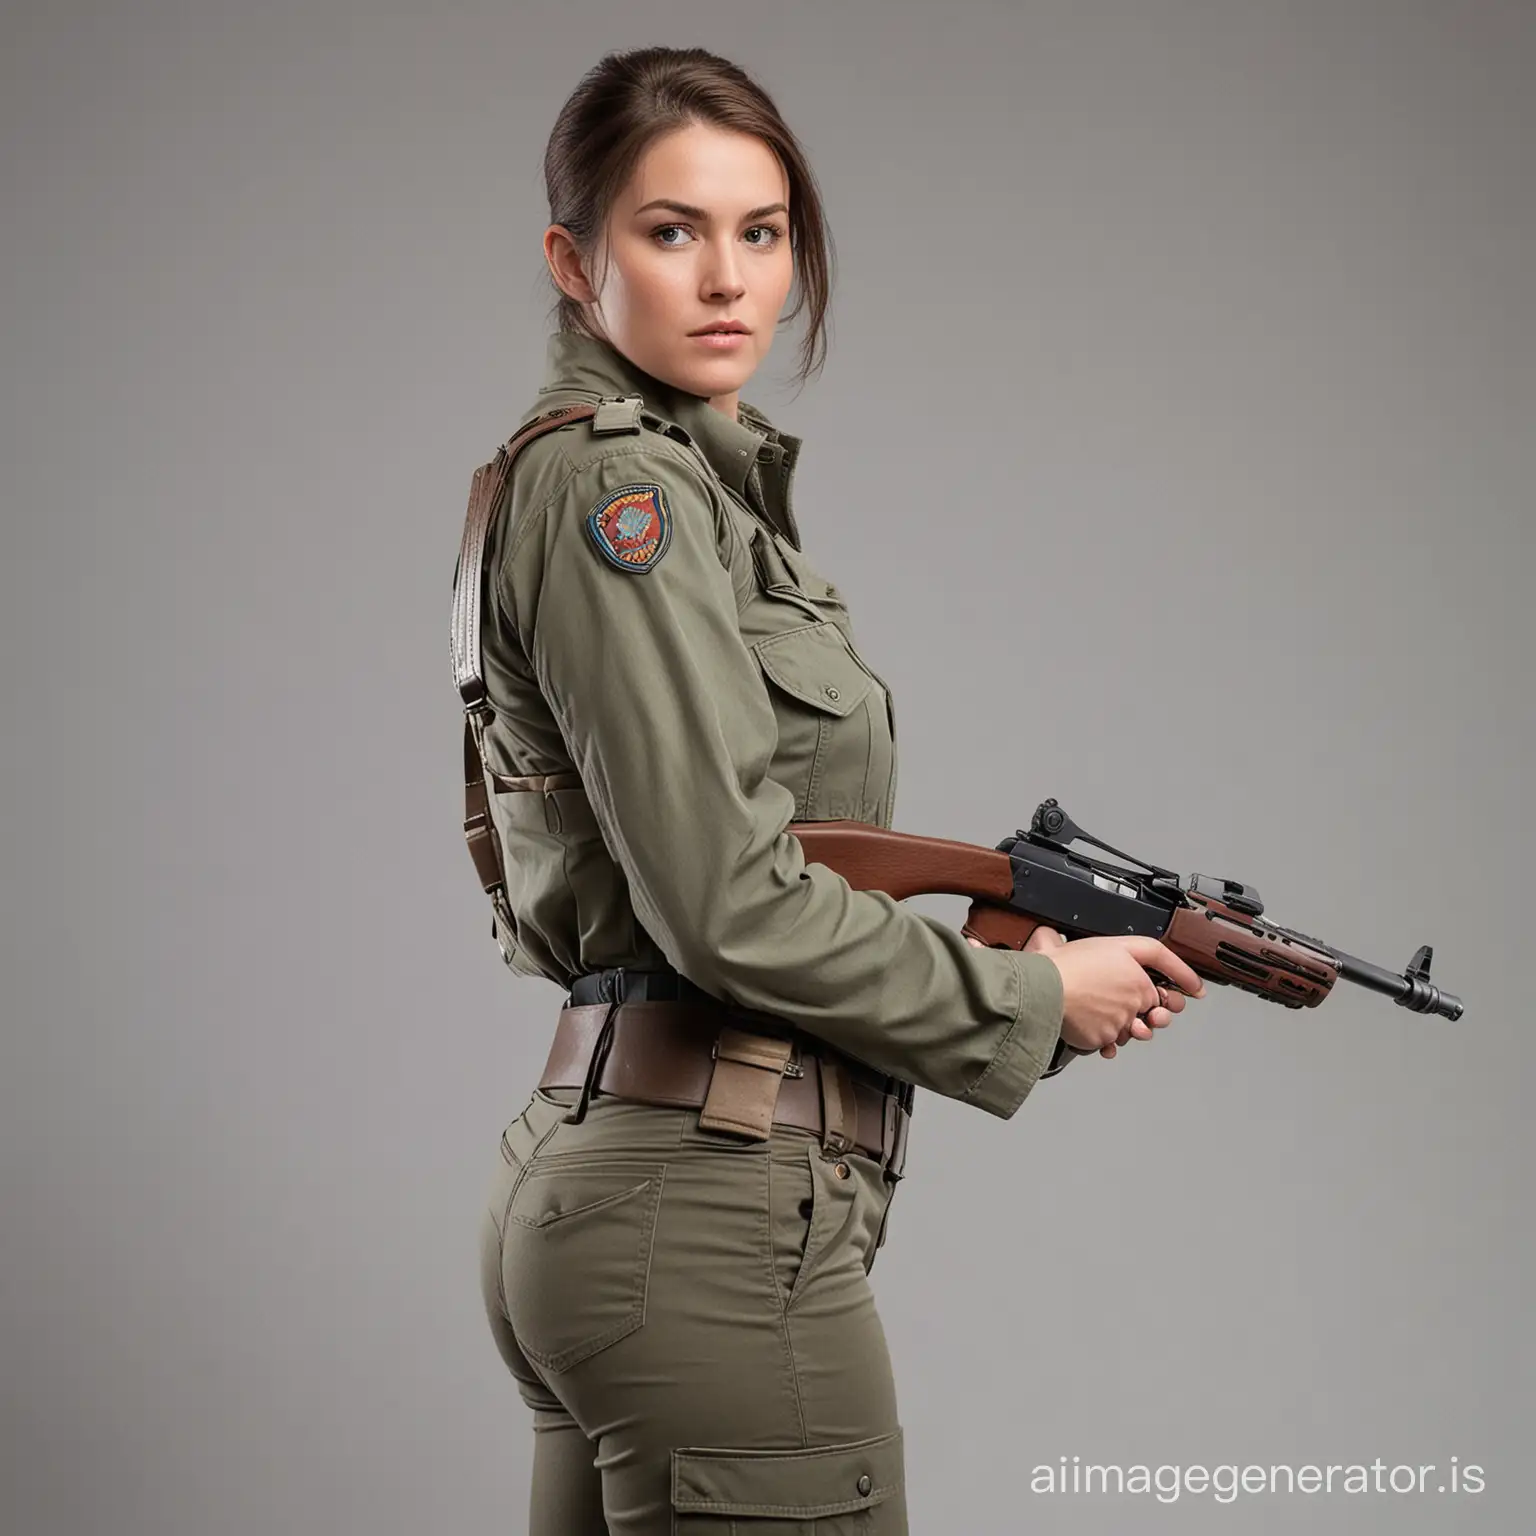 Woman holding a rifle, in mid-motion pose, standing sideways turning back to viewer